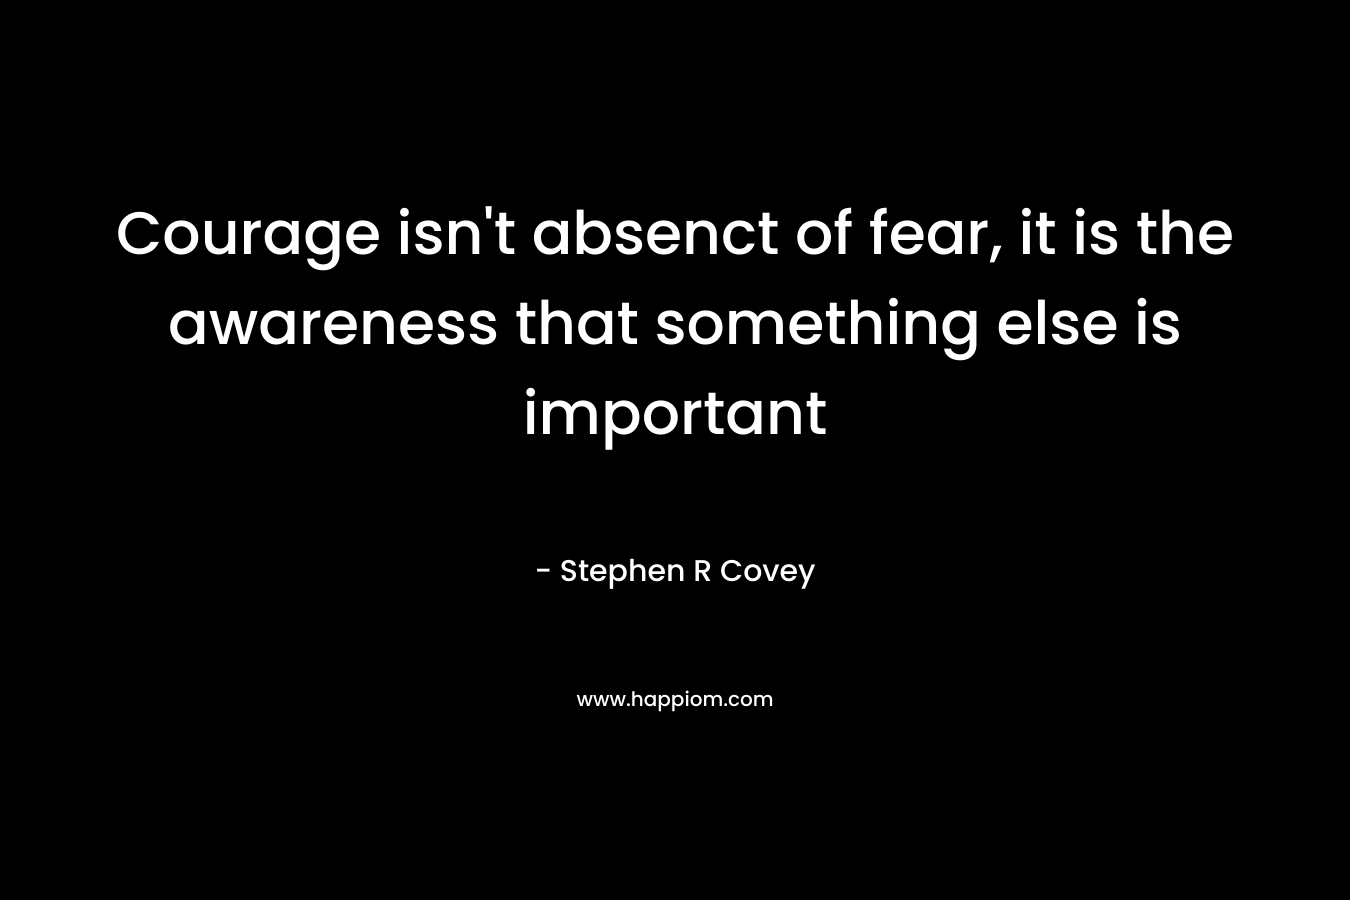 Courage isn't absenct of fear, it is the awareness that something else is important